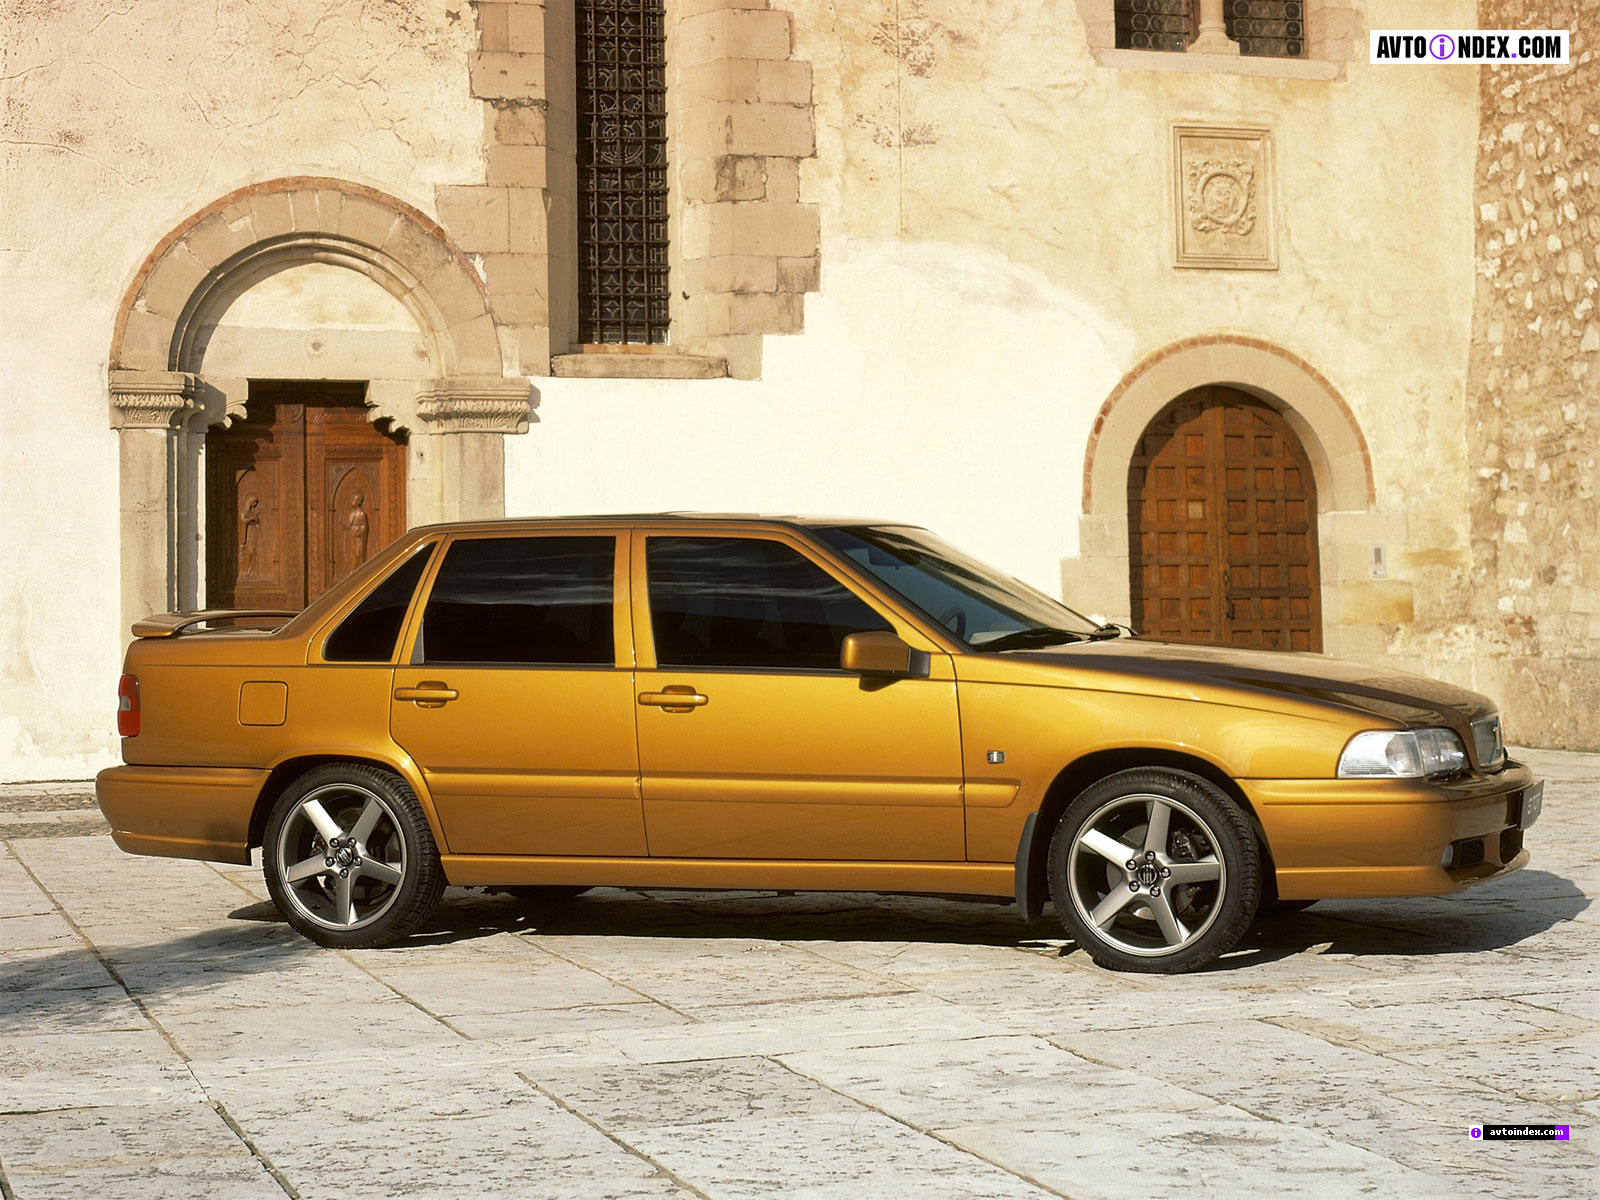 Enjoy these wonderful pictures of the Volvo S70.